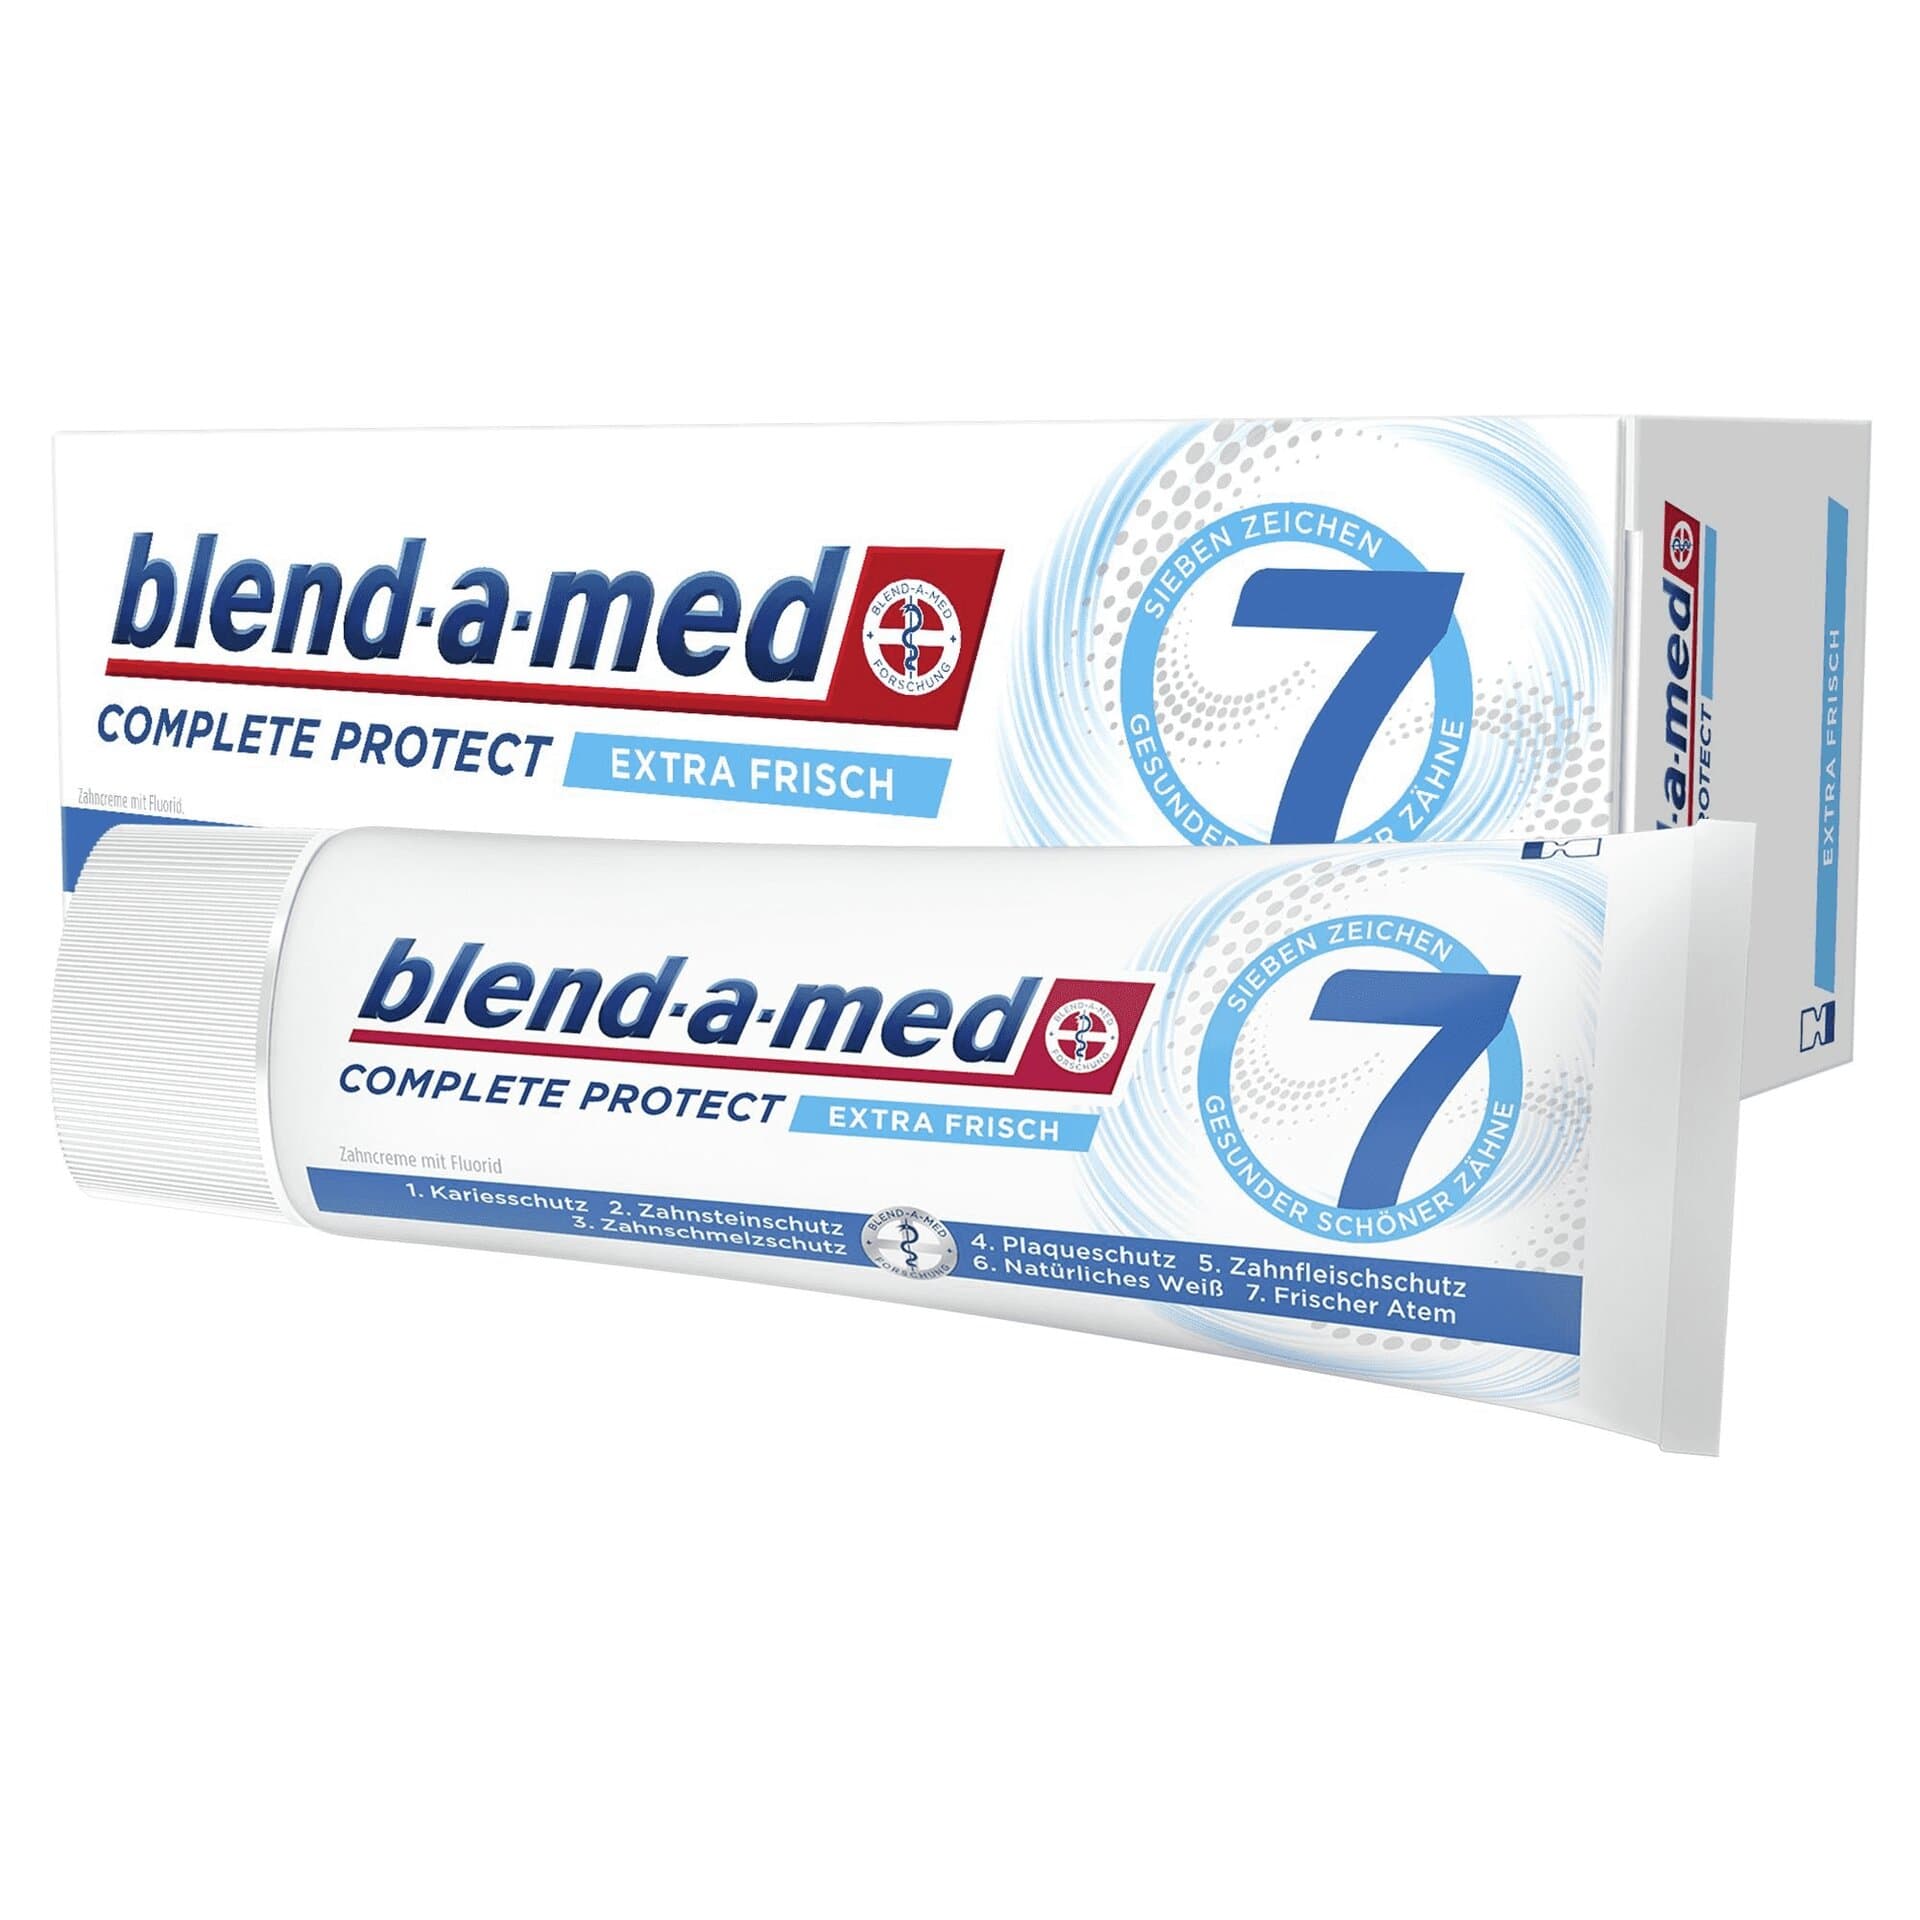 blend-a-med Complete Protect 7 Zahncreme